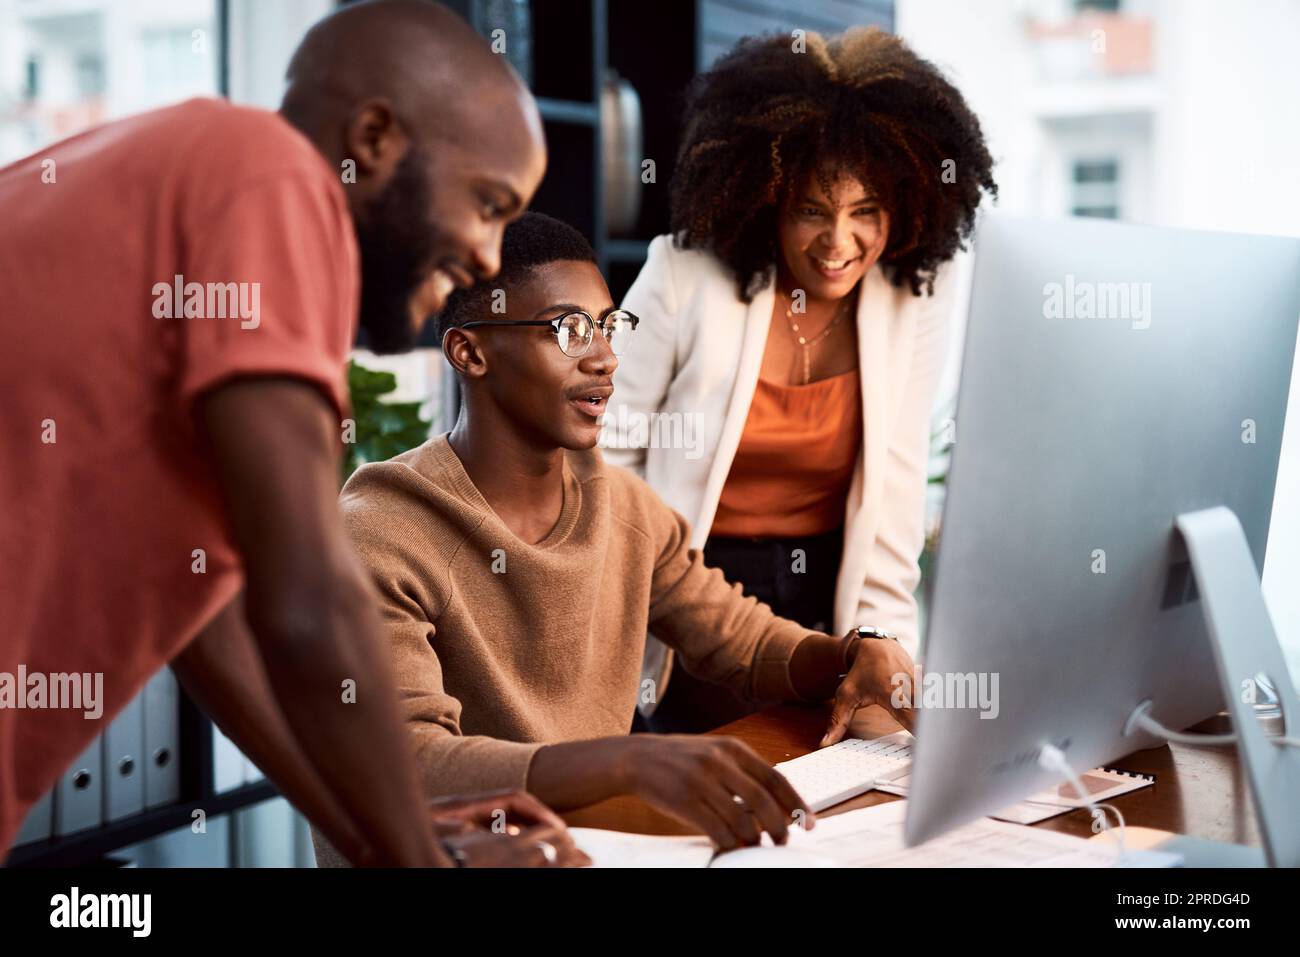 Were using the right platform to get our work out there. a group of businesspeople looking at something on a computer screen in an office. Stock Photo